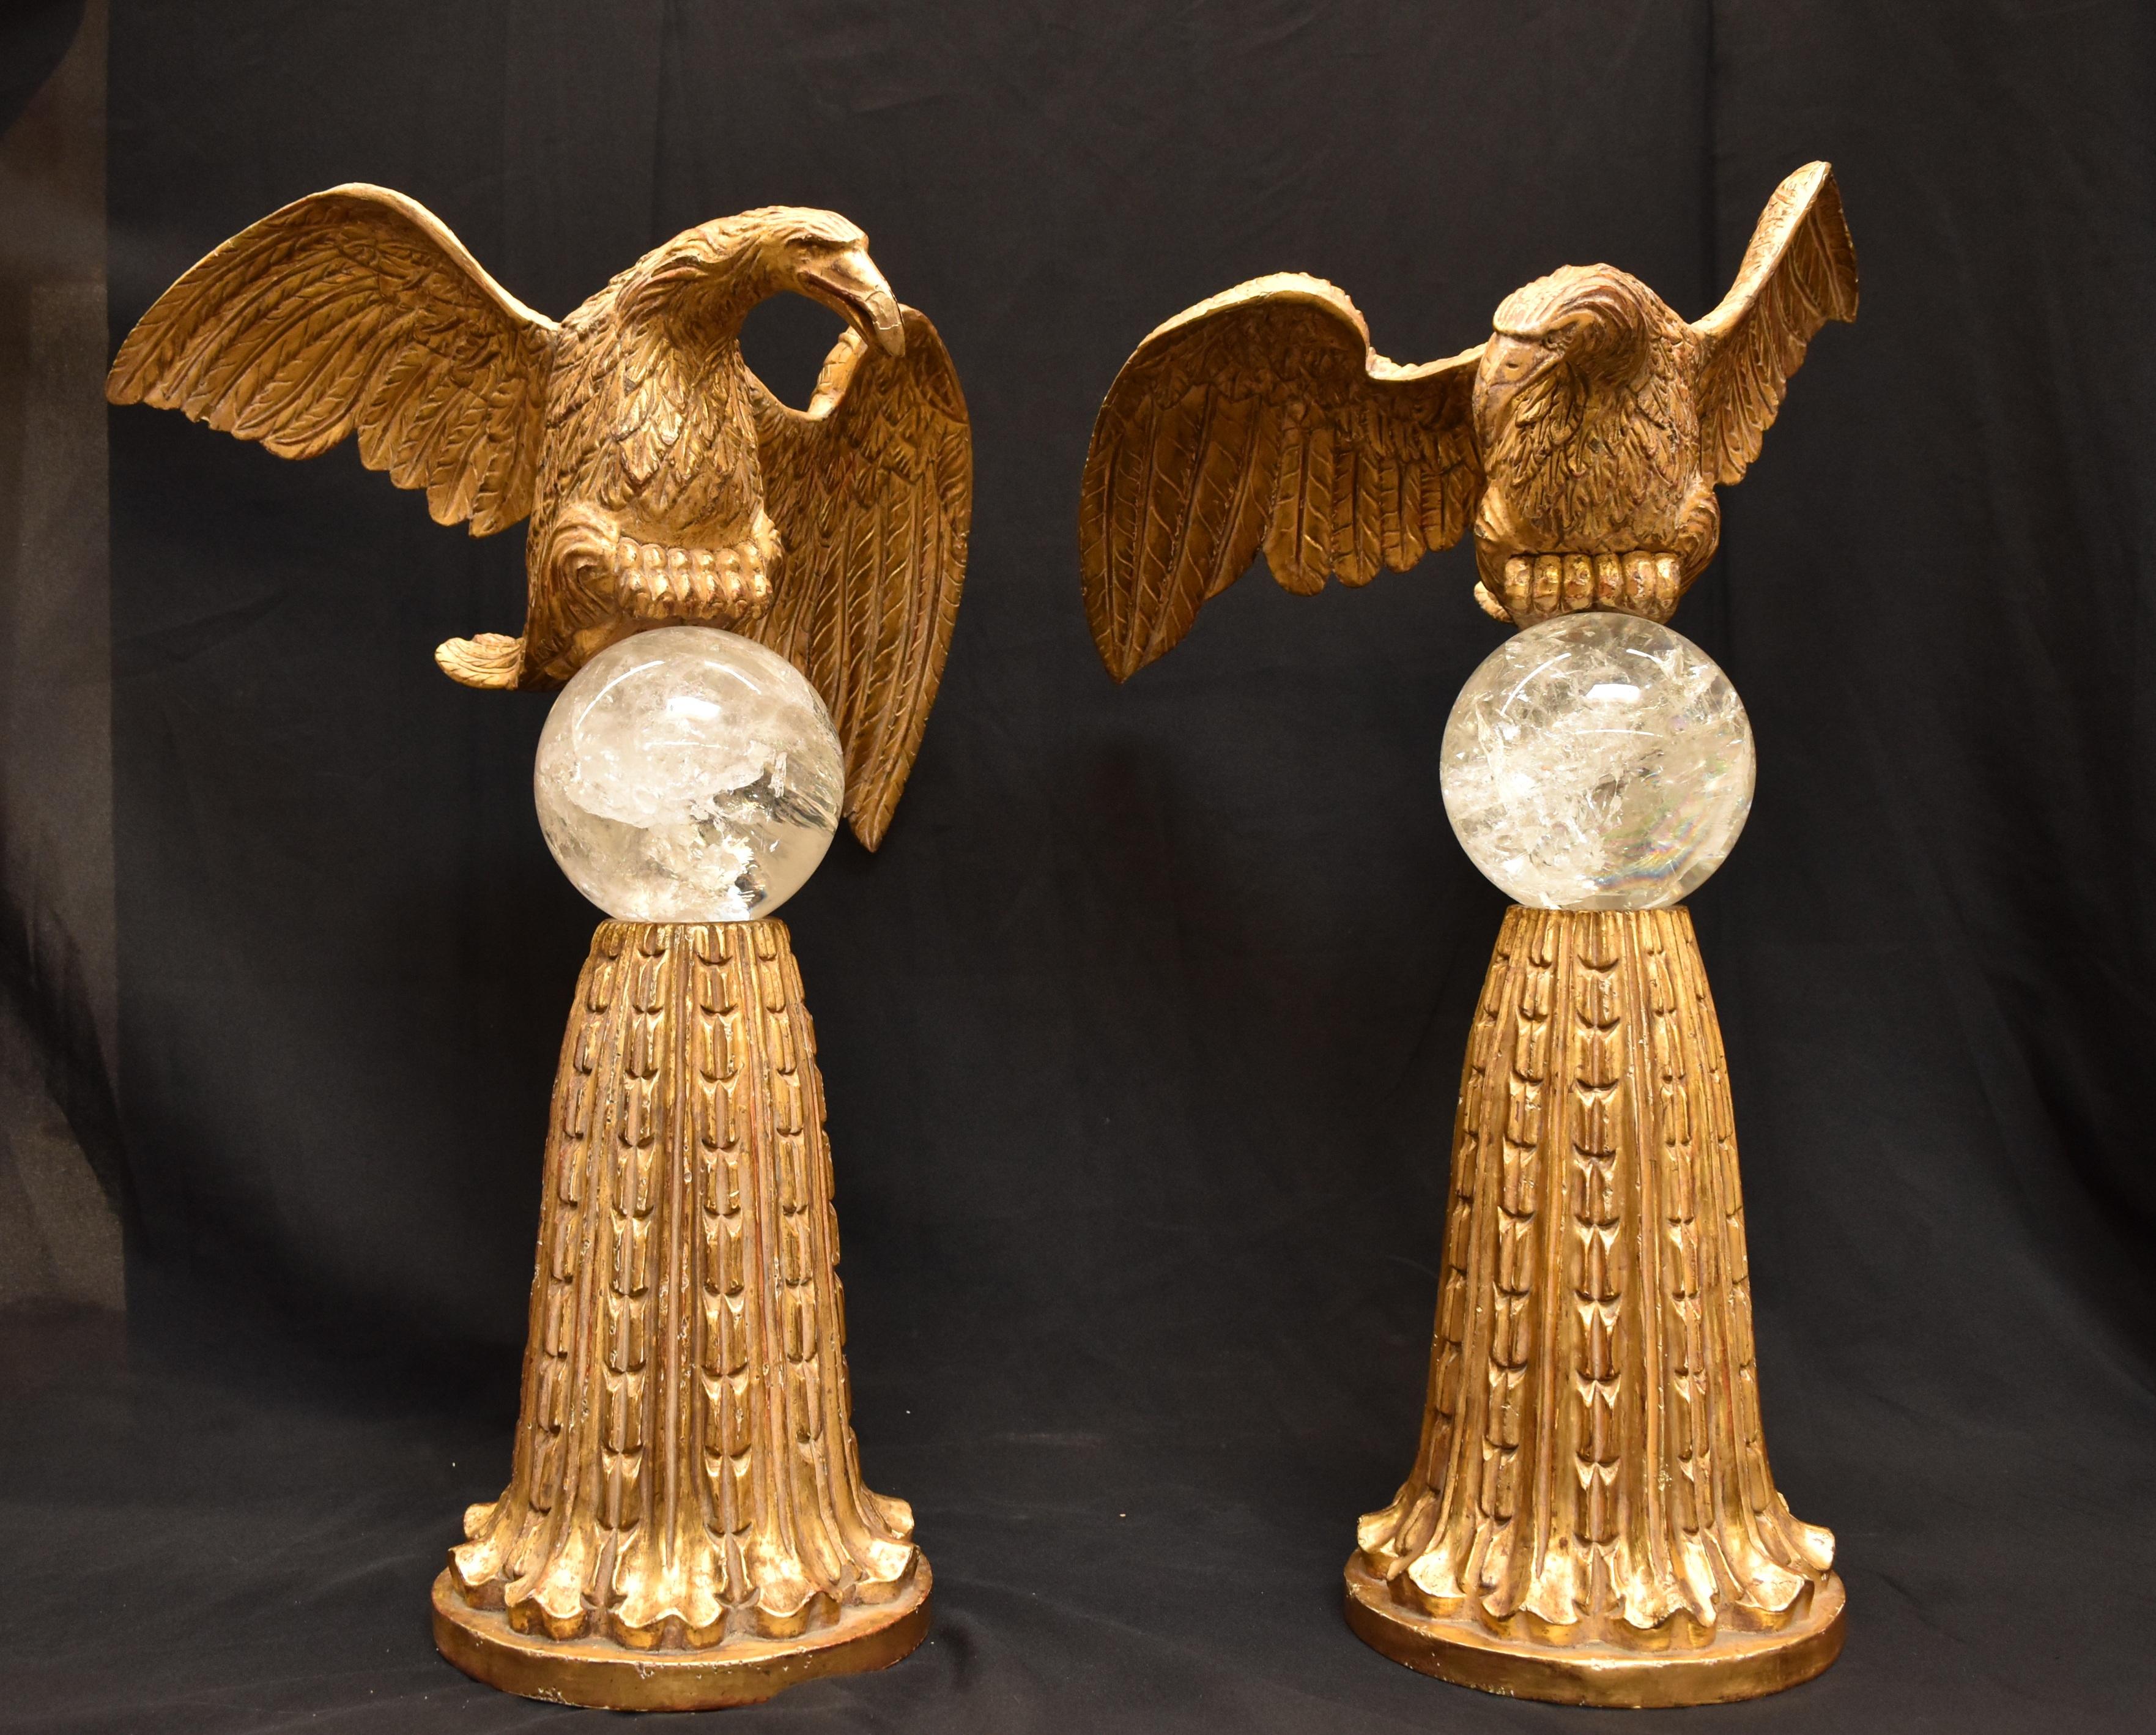 Hand-Carved Pair of Eagles on Rock Crystal Spheres For Sale